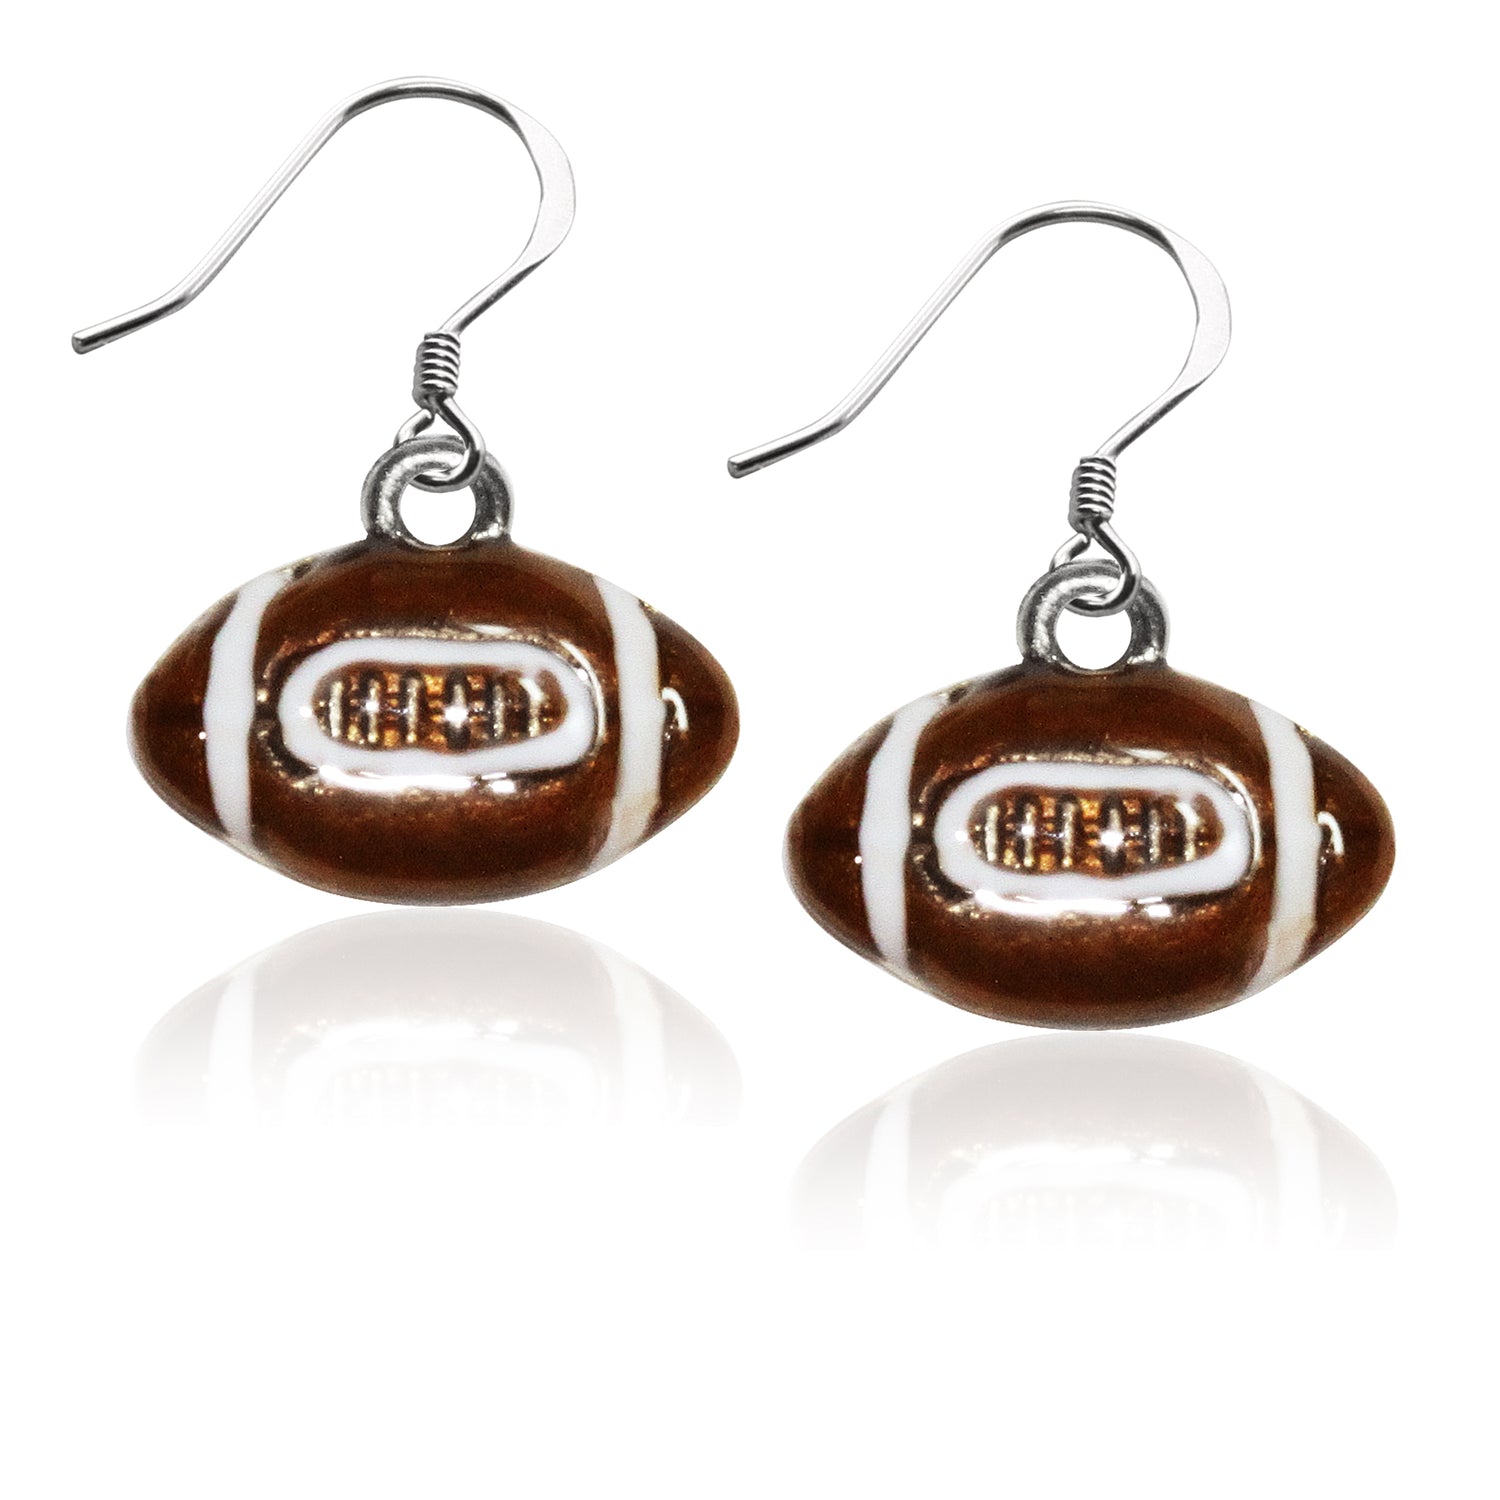 Whimsical Gifts | Football Charm Earrings in Silver Finish | Hobbies & Special Interests | Sports | Jewelry